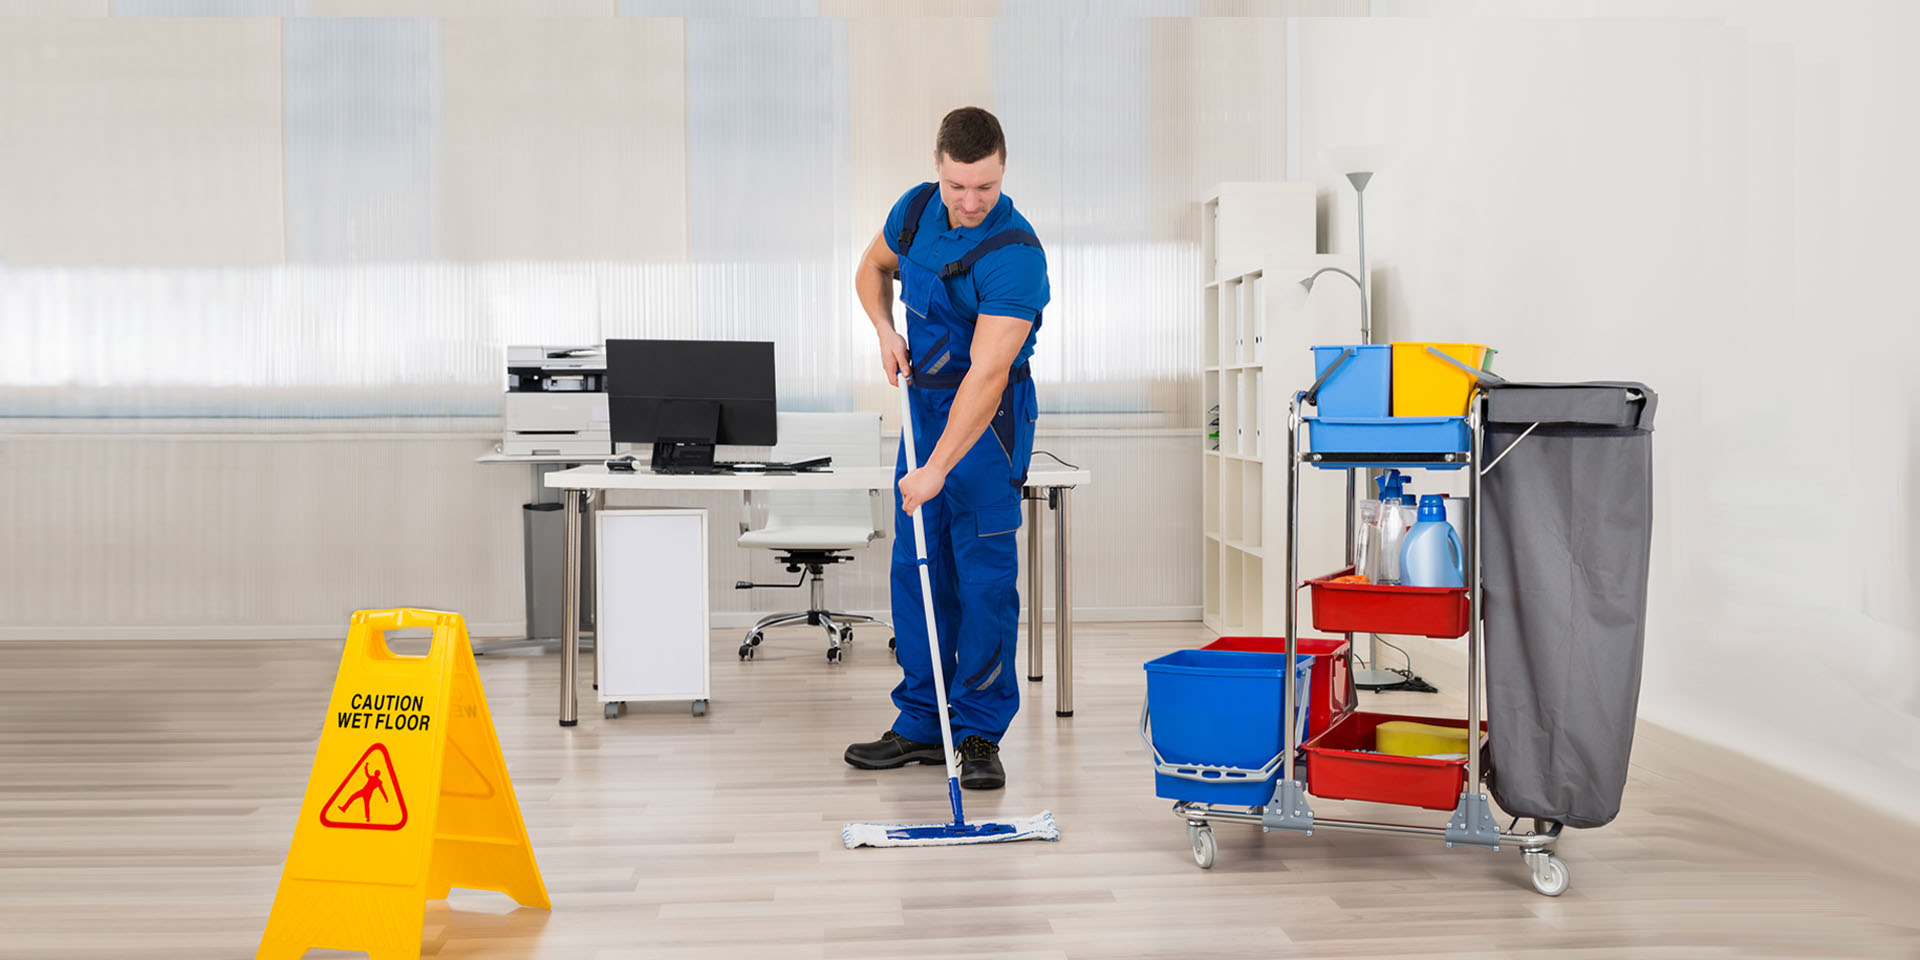 Lulu Pest Control & Cleaning | Cleaning Services in Abu Dhabi